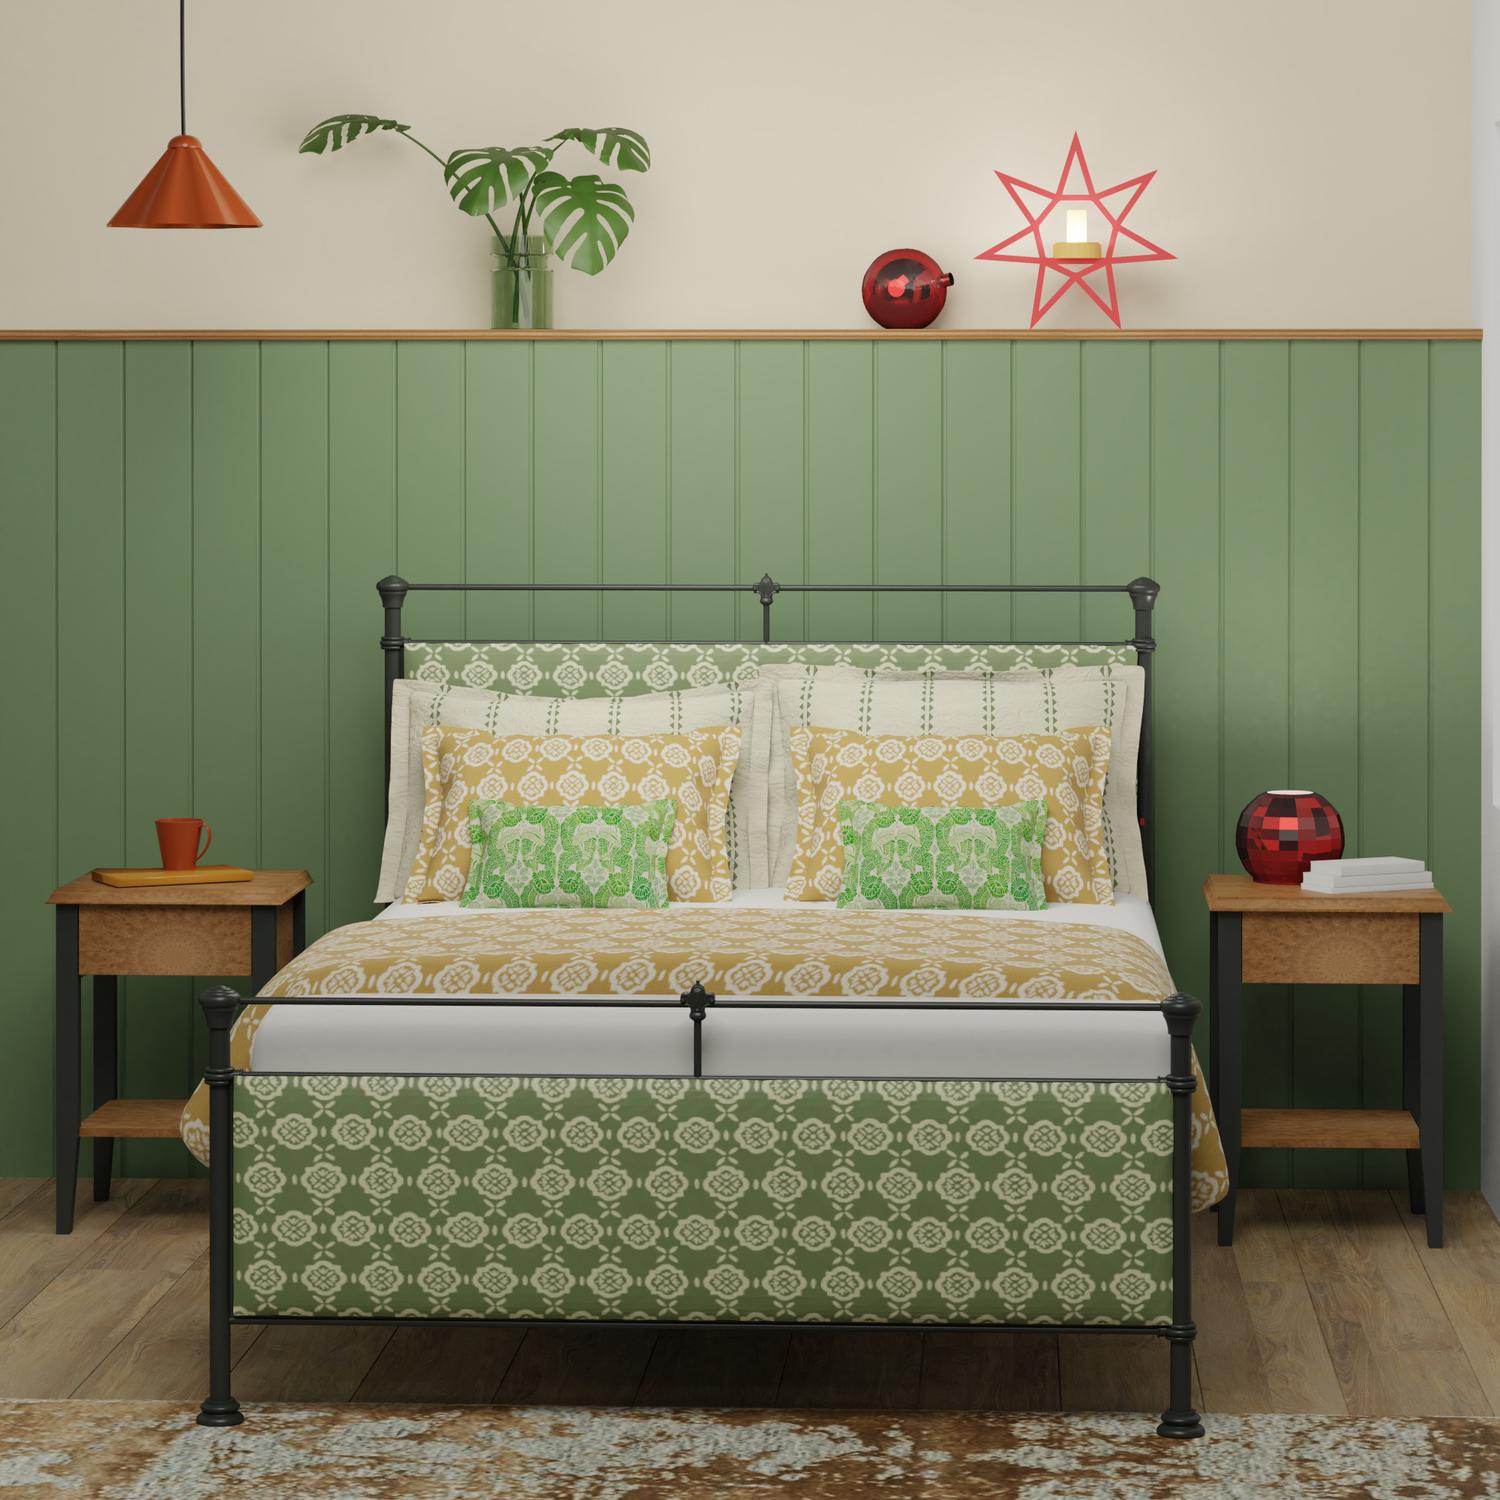 Nancy iron bed - Image green and gold bedroom